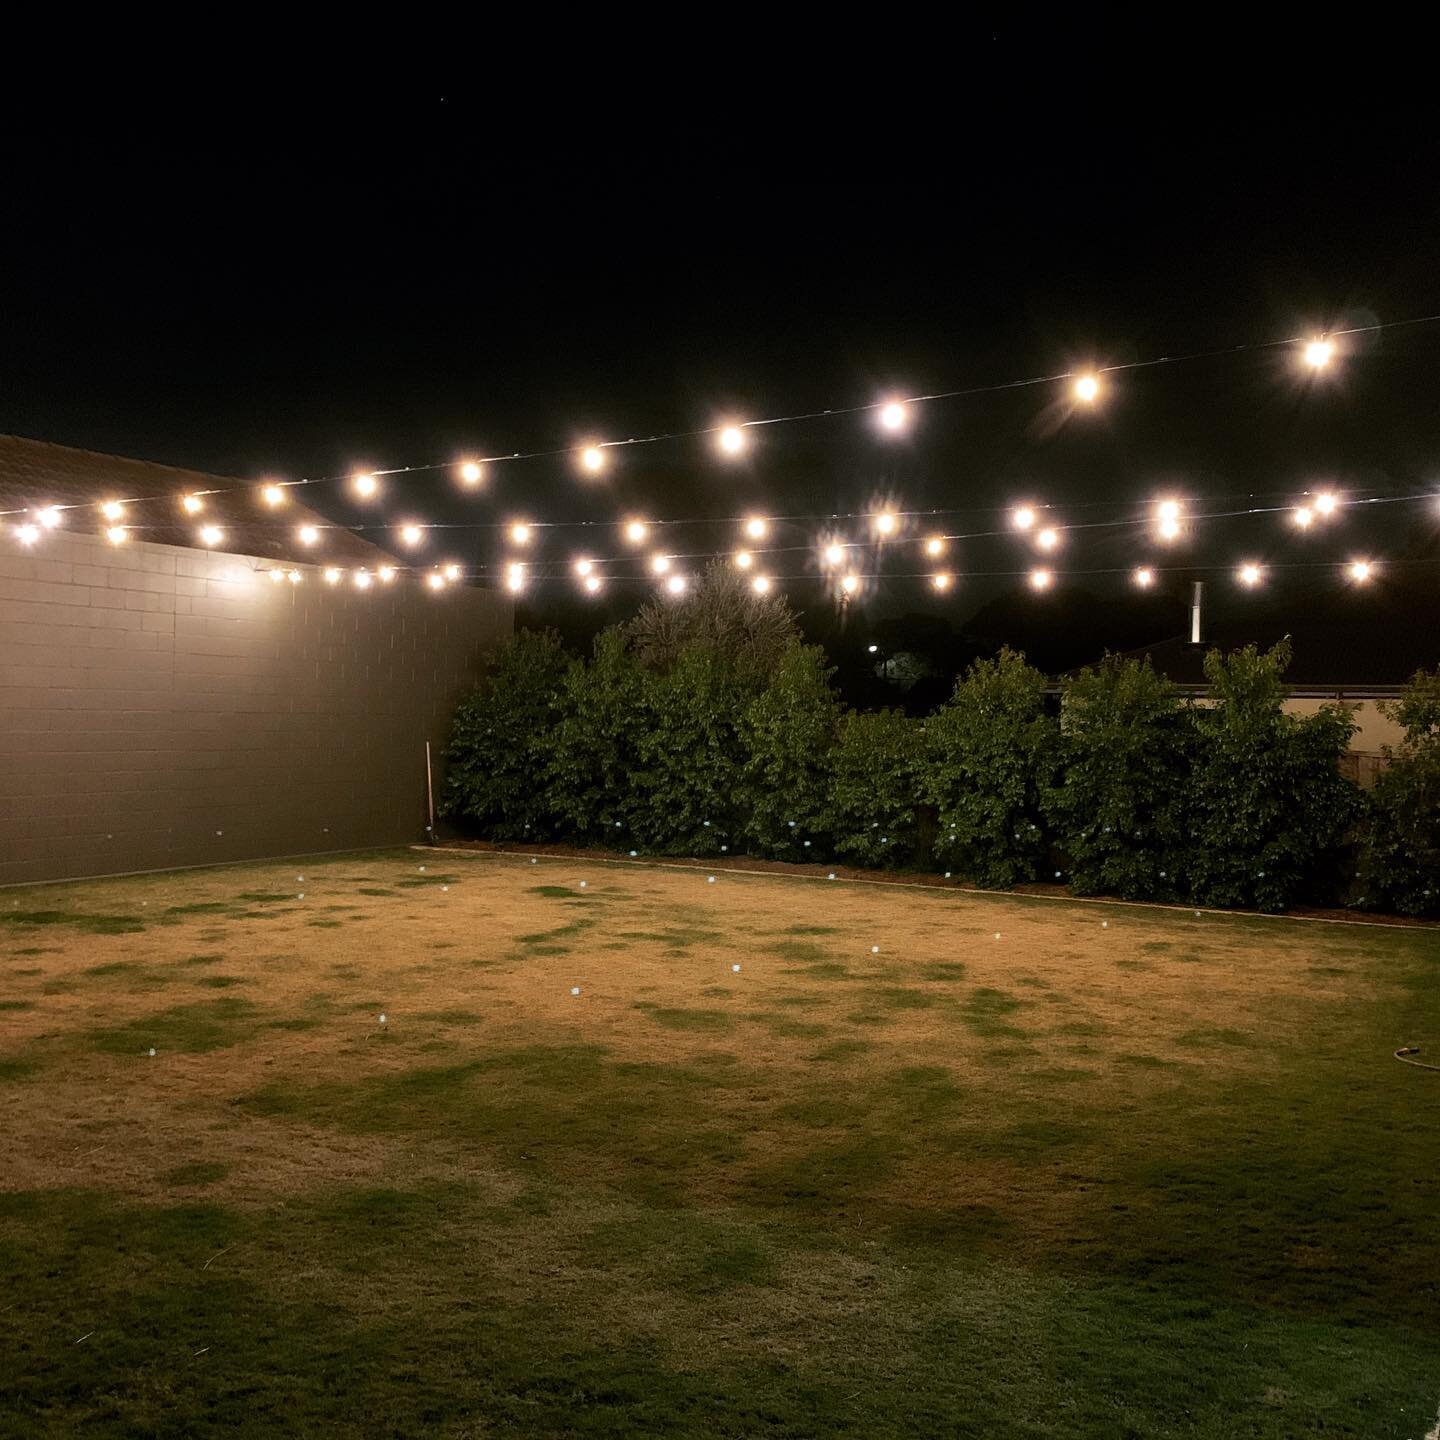 We loved fitting out this large back yard the other day with dimmable commercial festoon lights for @staggfinefood. Such an epic space!! Just need to add a party! #sparkylife #festoonlights #lighting #adelaideelectrician